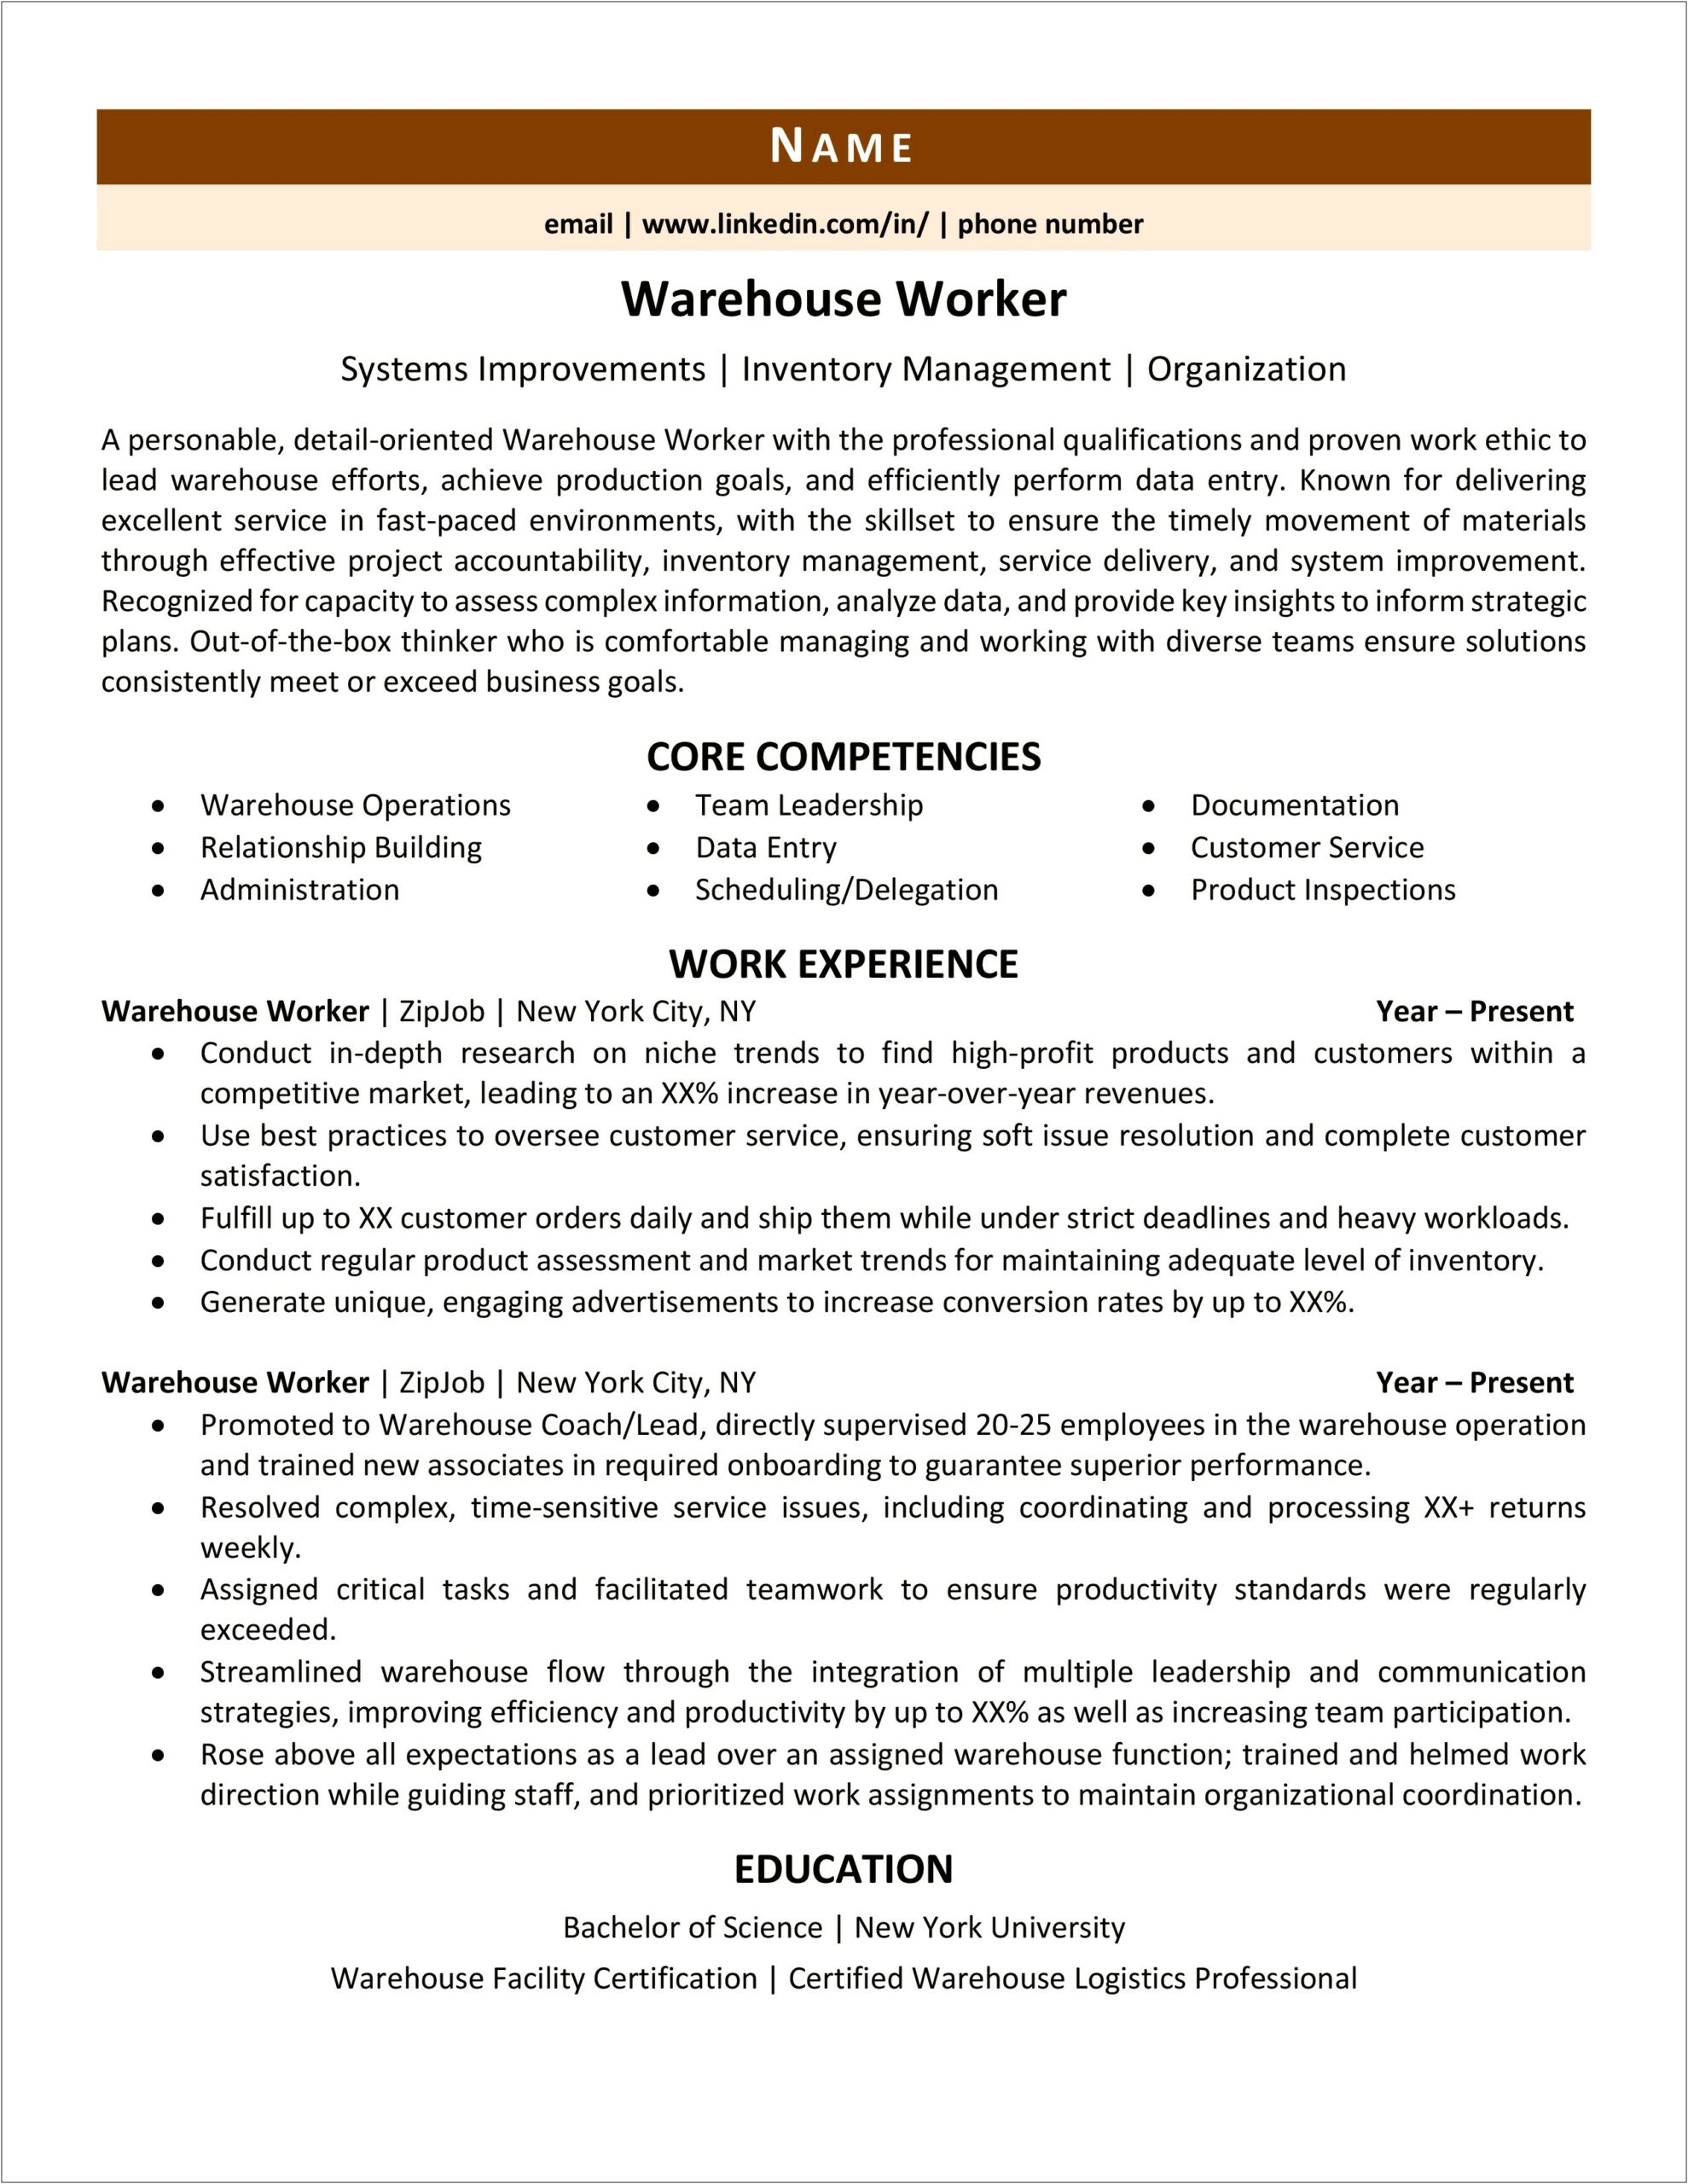 Resume Sample For A Warehouse Office Emploee